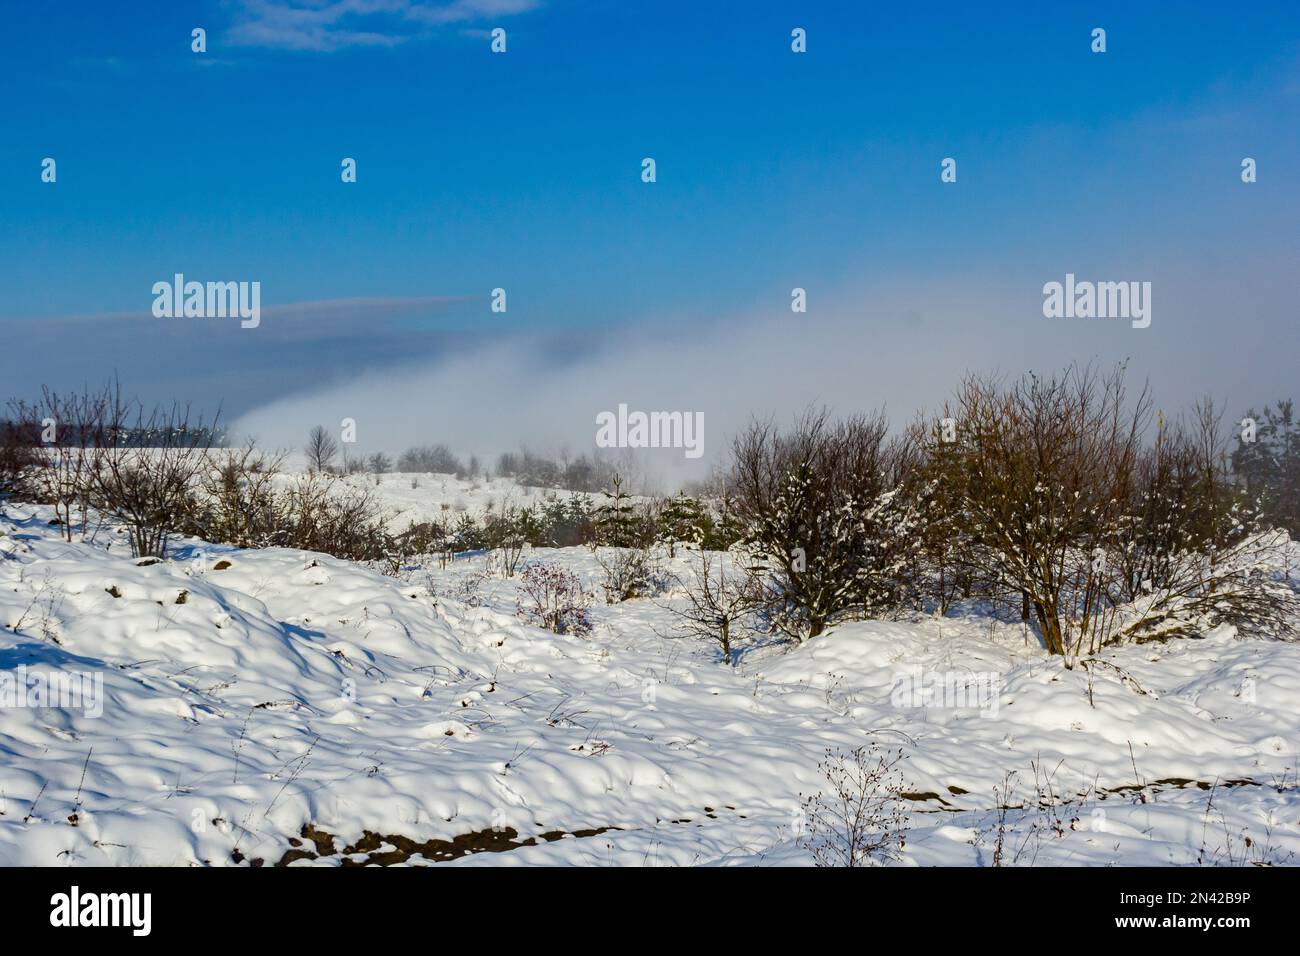 Beautiful winter landscape with snow-covered trees. Blue sky and textured snow. Winter's tale. Stock Photo